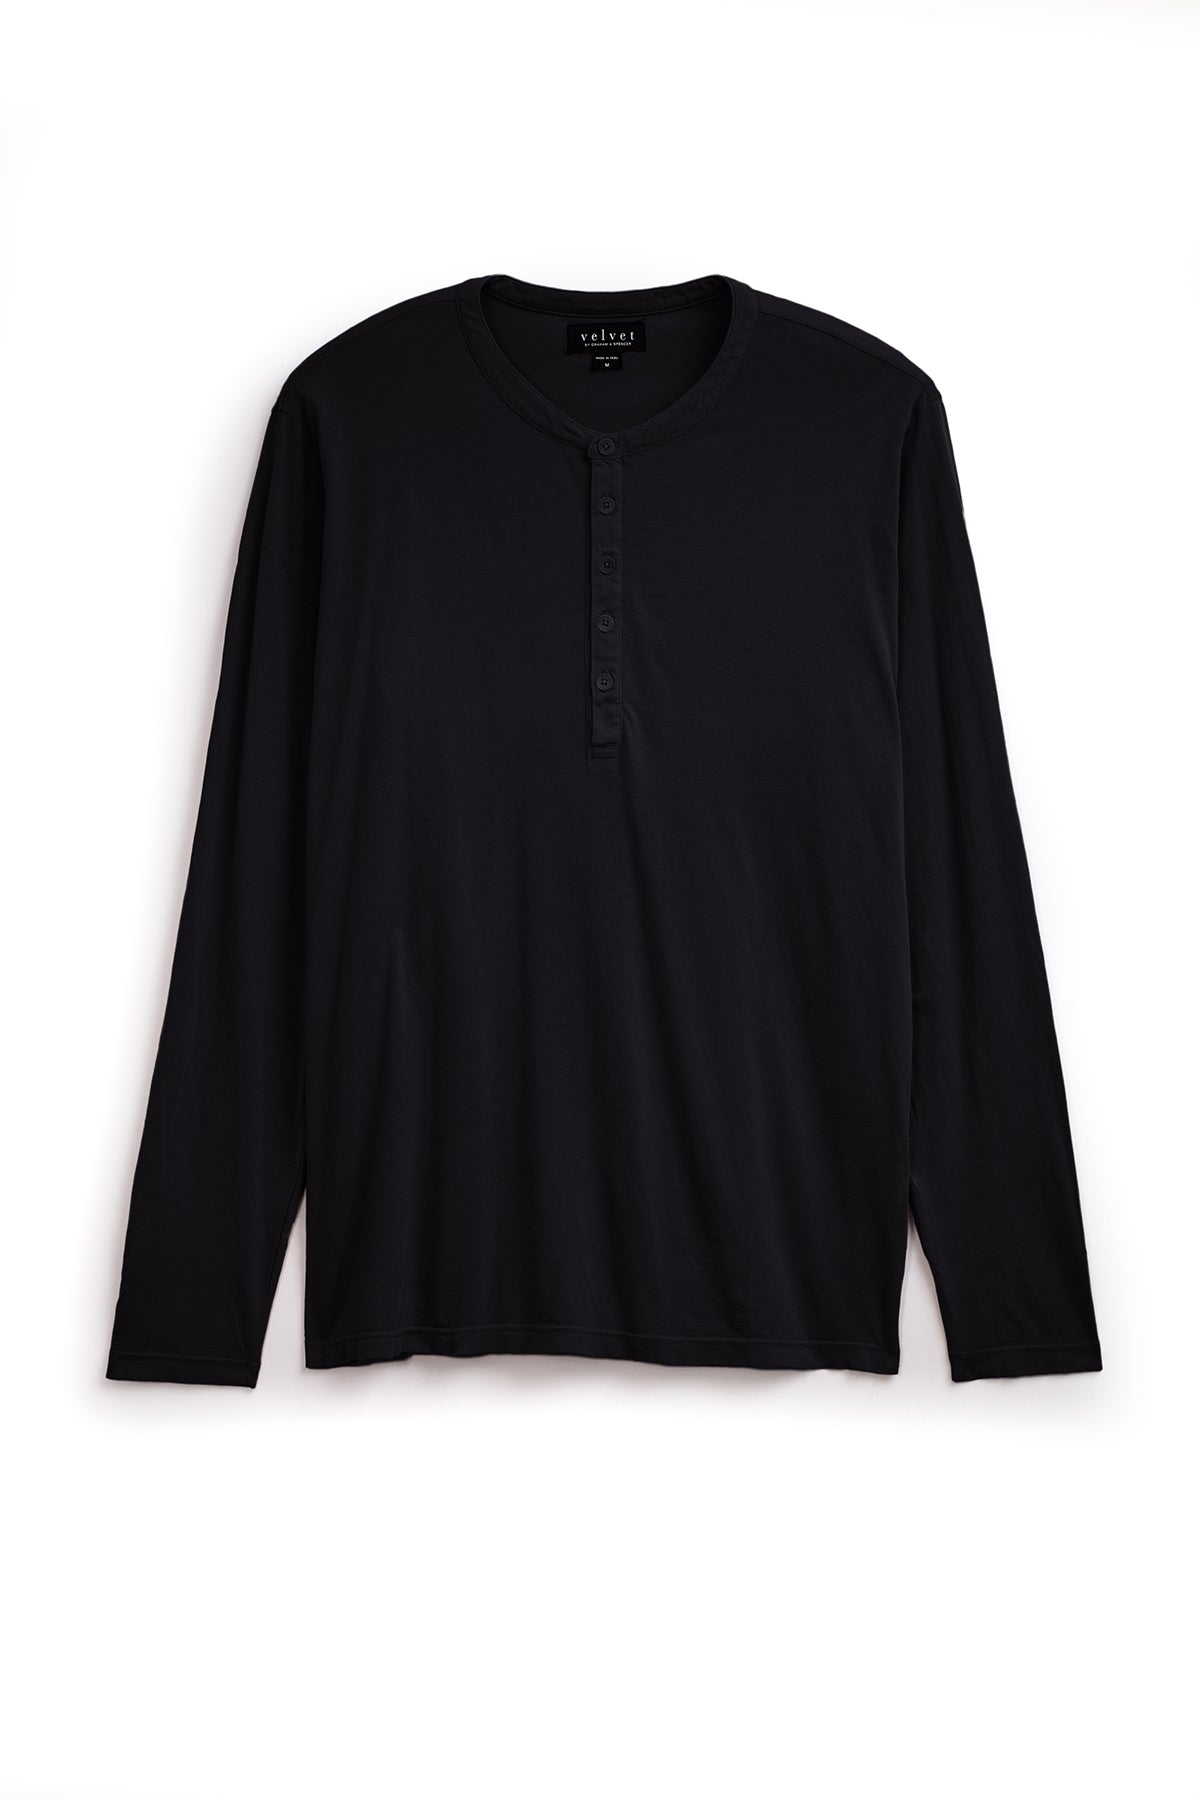 A lightweight, whisper knit black ALVARO HENLEY by Velvet by Graham & Spencer with a buttoned placket is displayed against a white background.-20811086528705